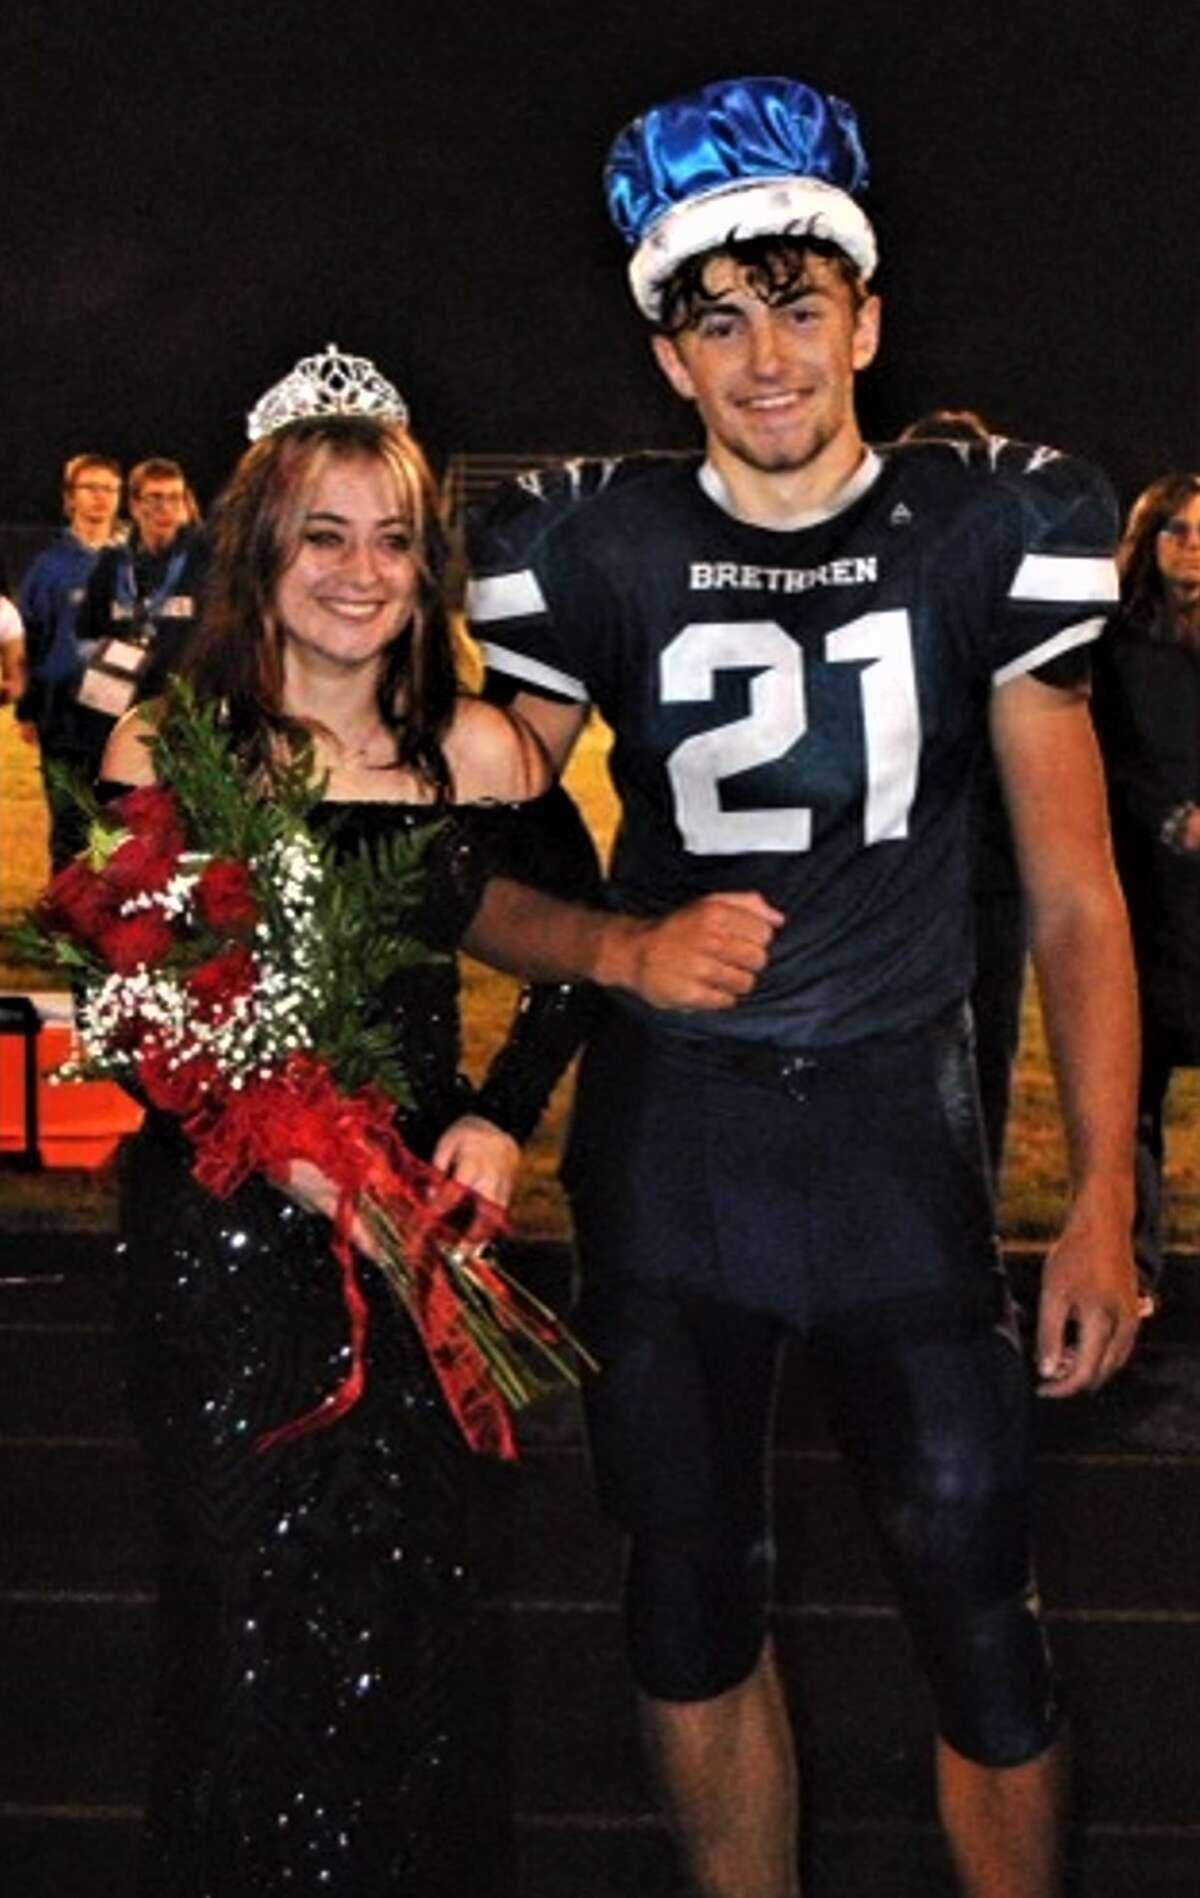 Meridee Gutowski and Clayton Mobley were crowned as Brethren High School's 2022 Homecoming Queen and King on Friday during halftime of the Bobcats' 50-19 victory over Baldwin.